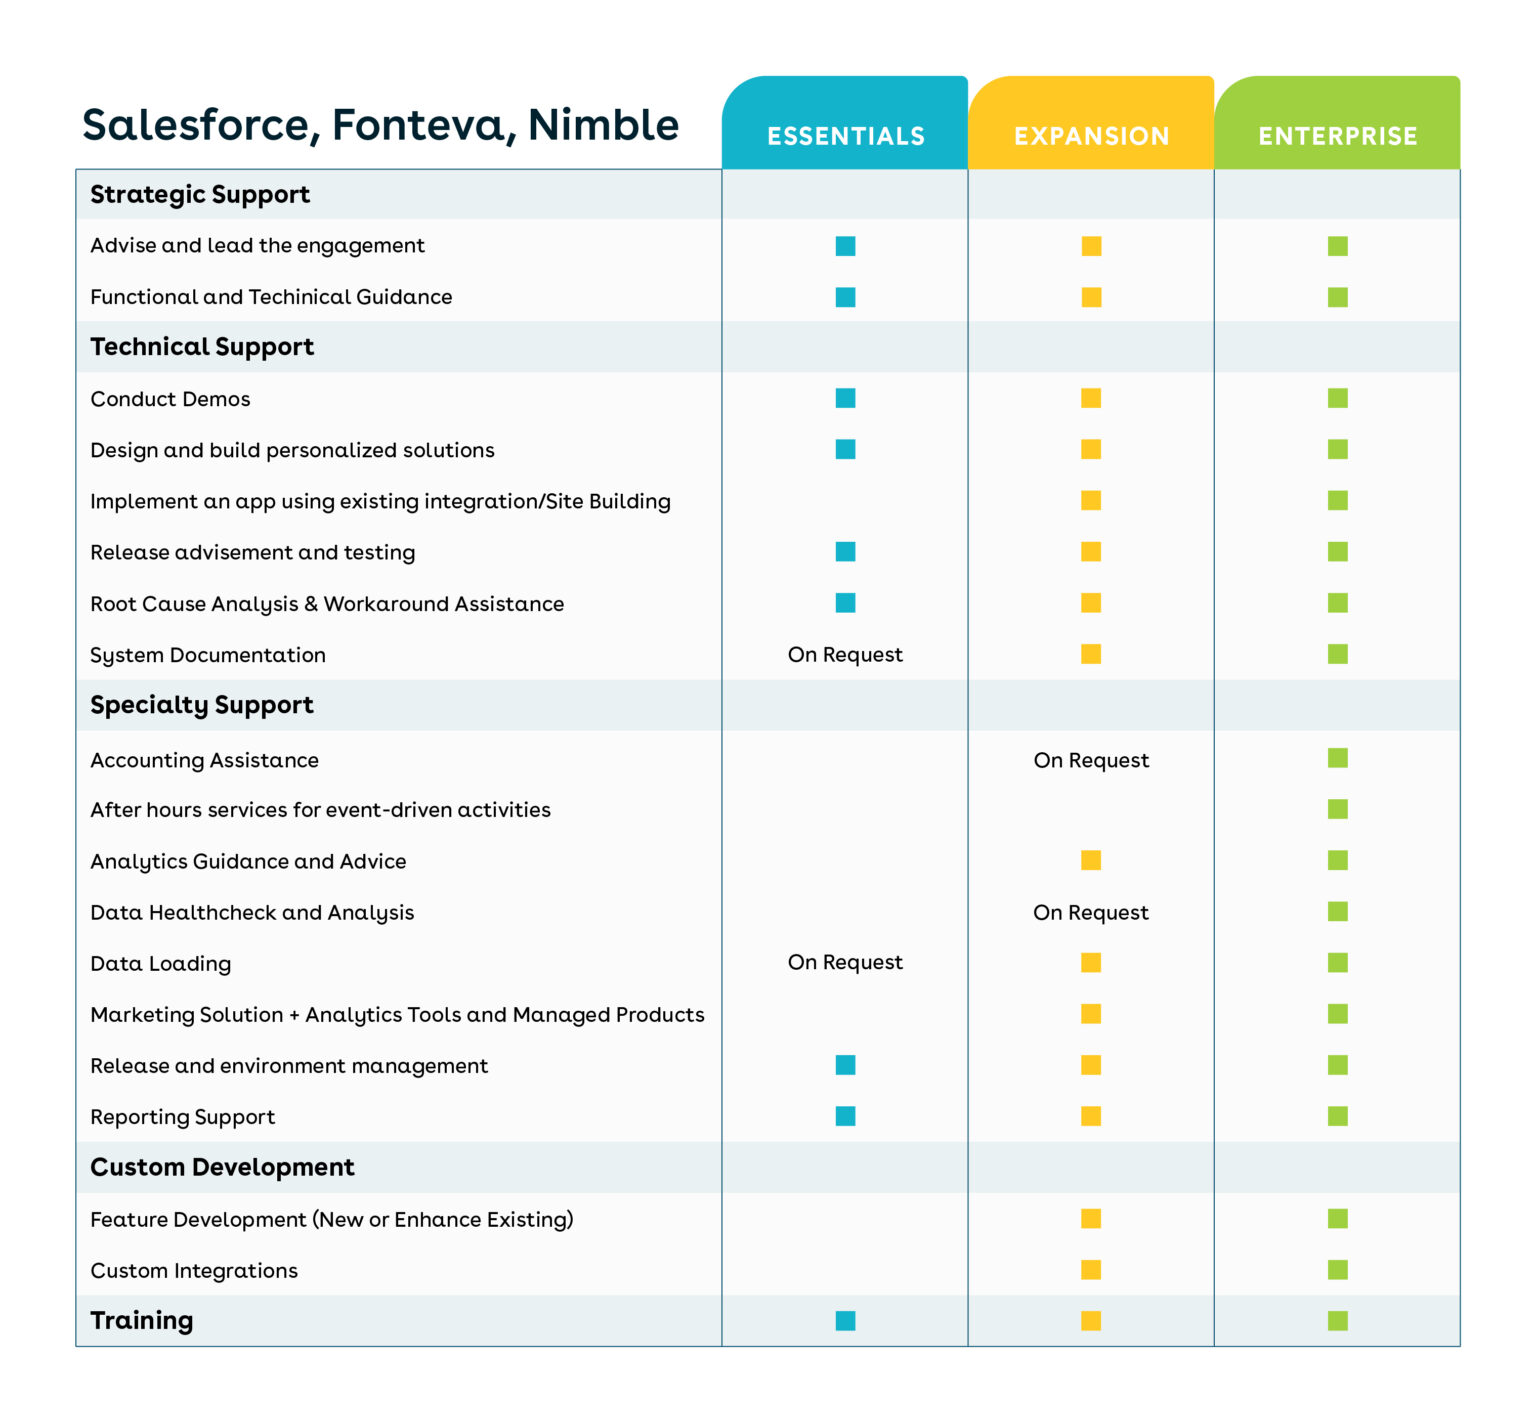 The image shows Fionta's service packages for Salesforce, Nimble, and Fonteva managed services.